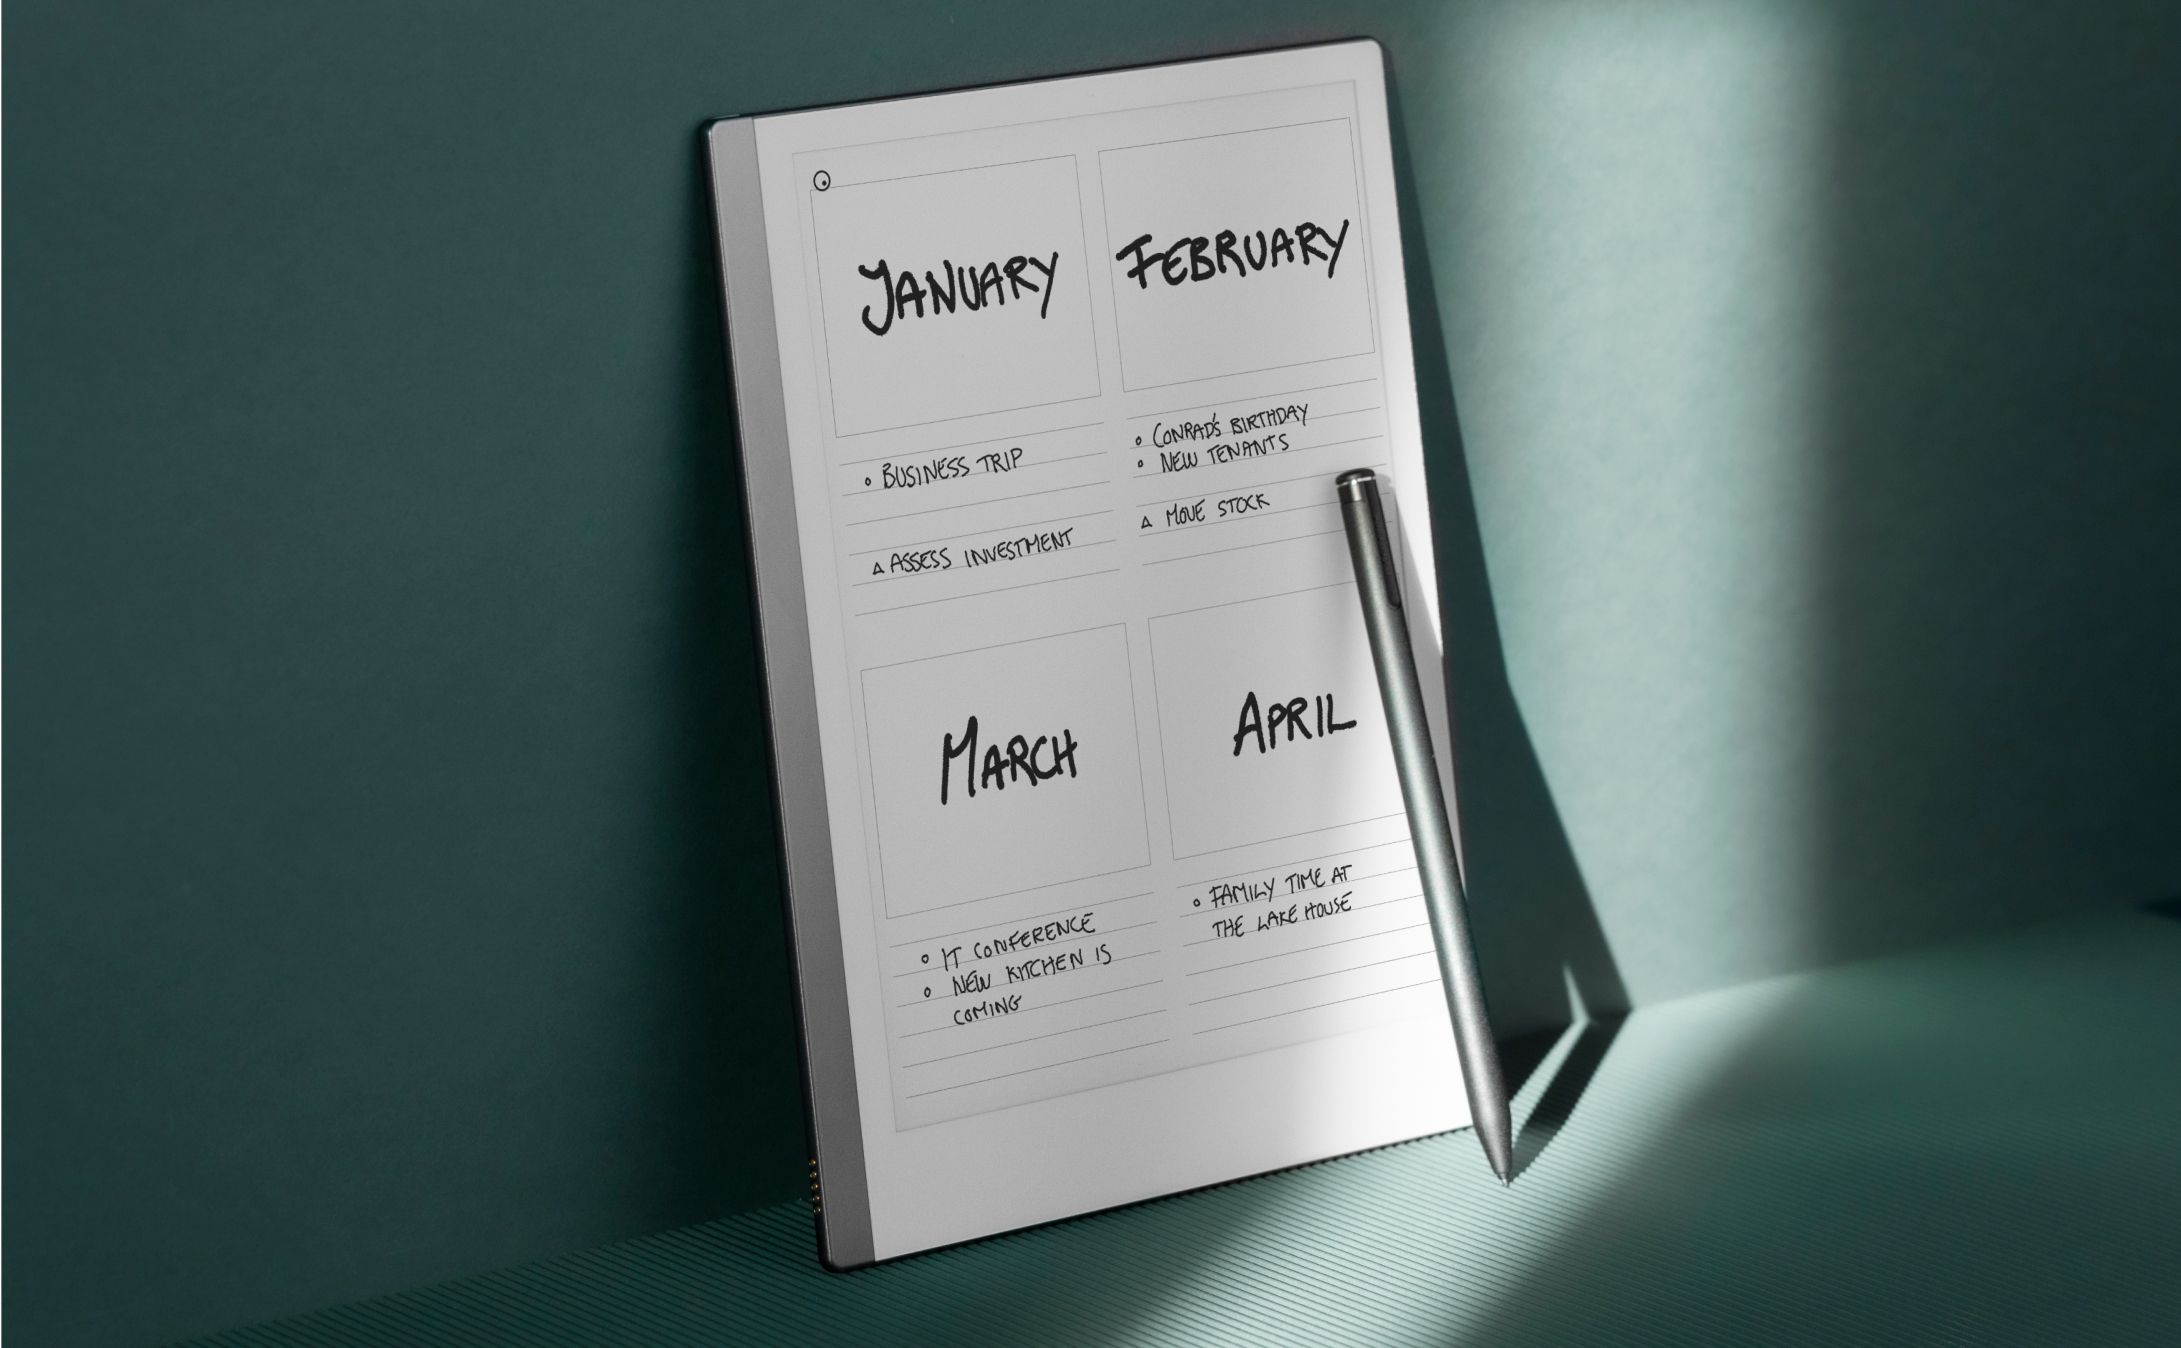 Reach your goals with planners